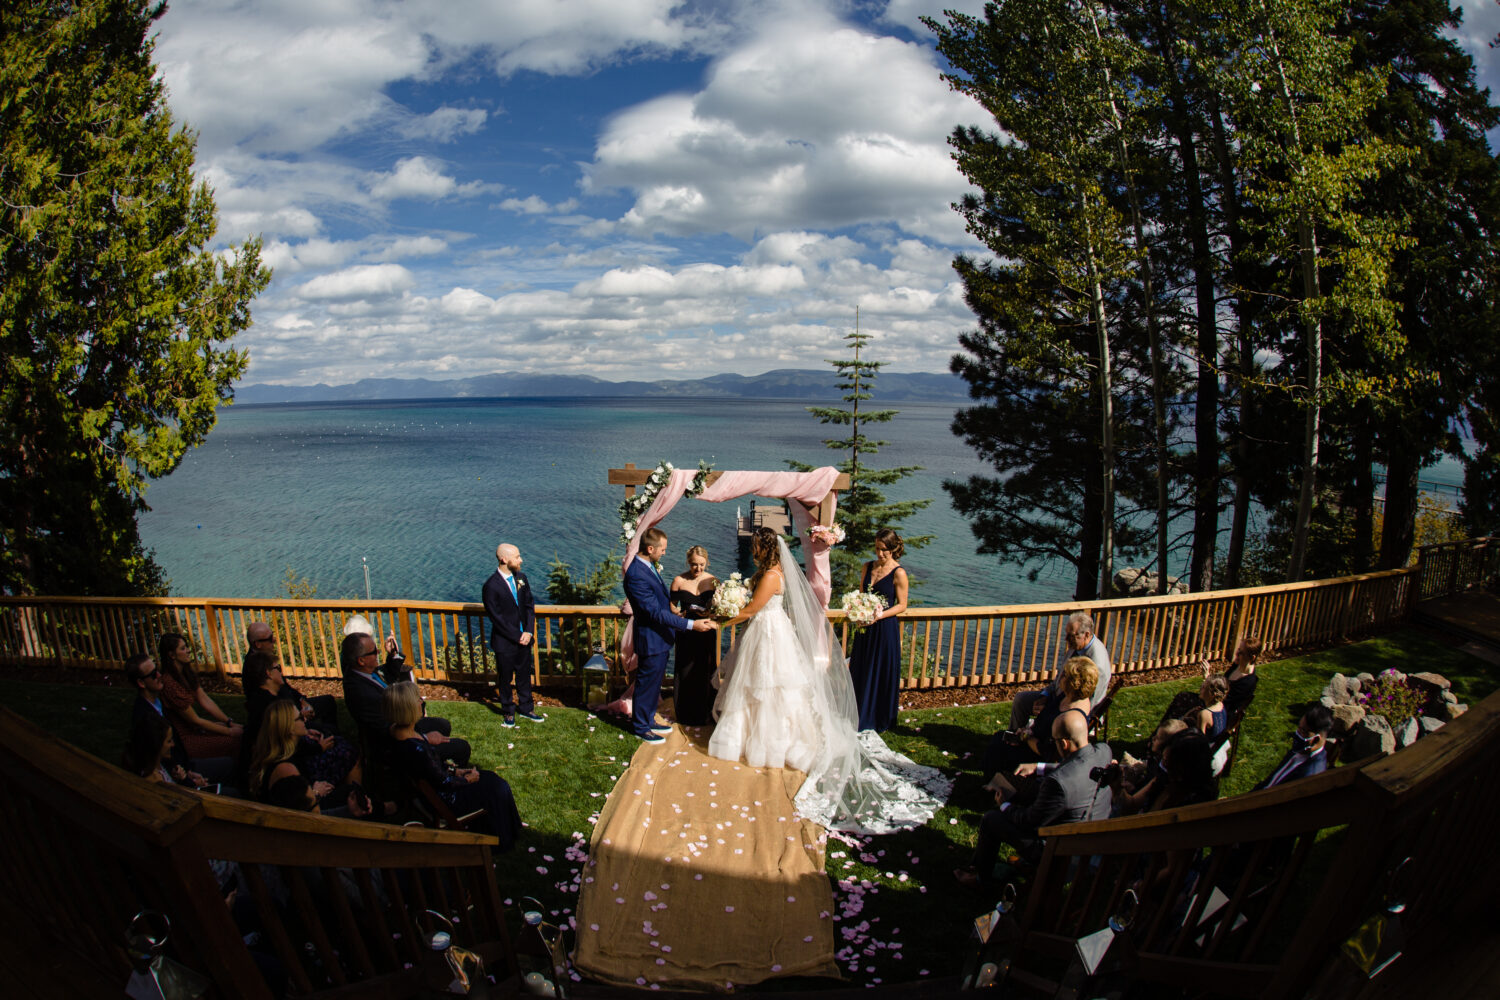 Intimate wedding ceremony with views of Lake Tahoe.